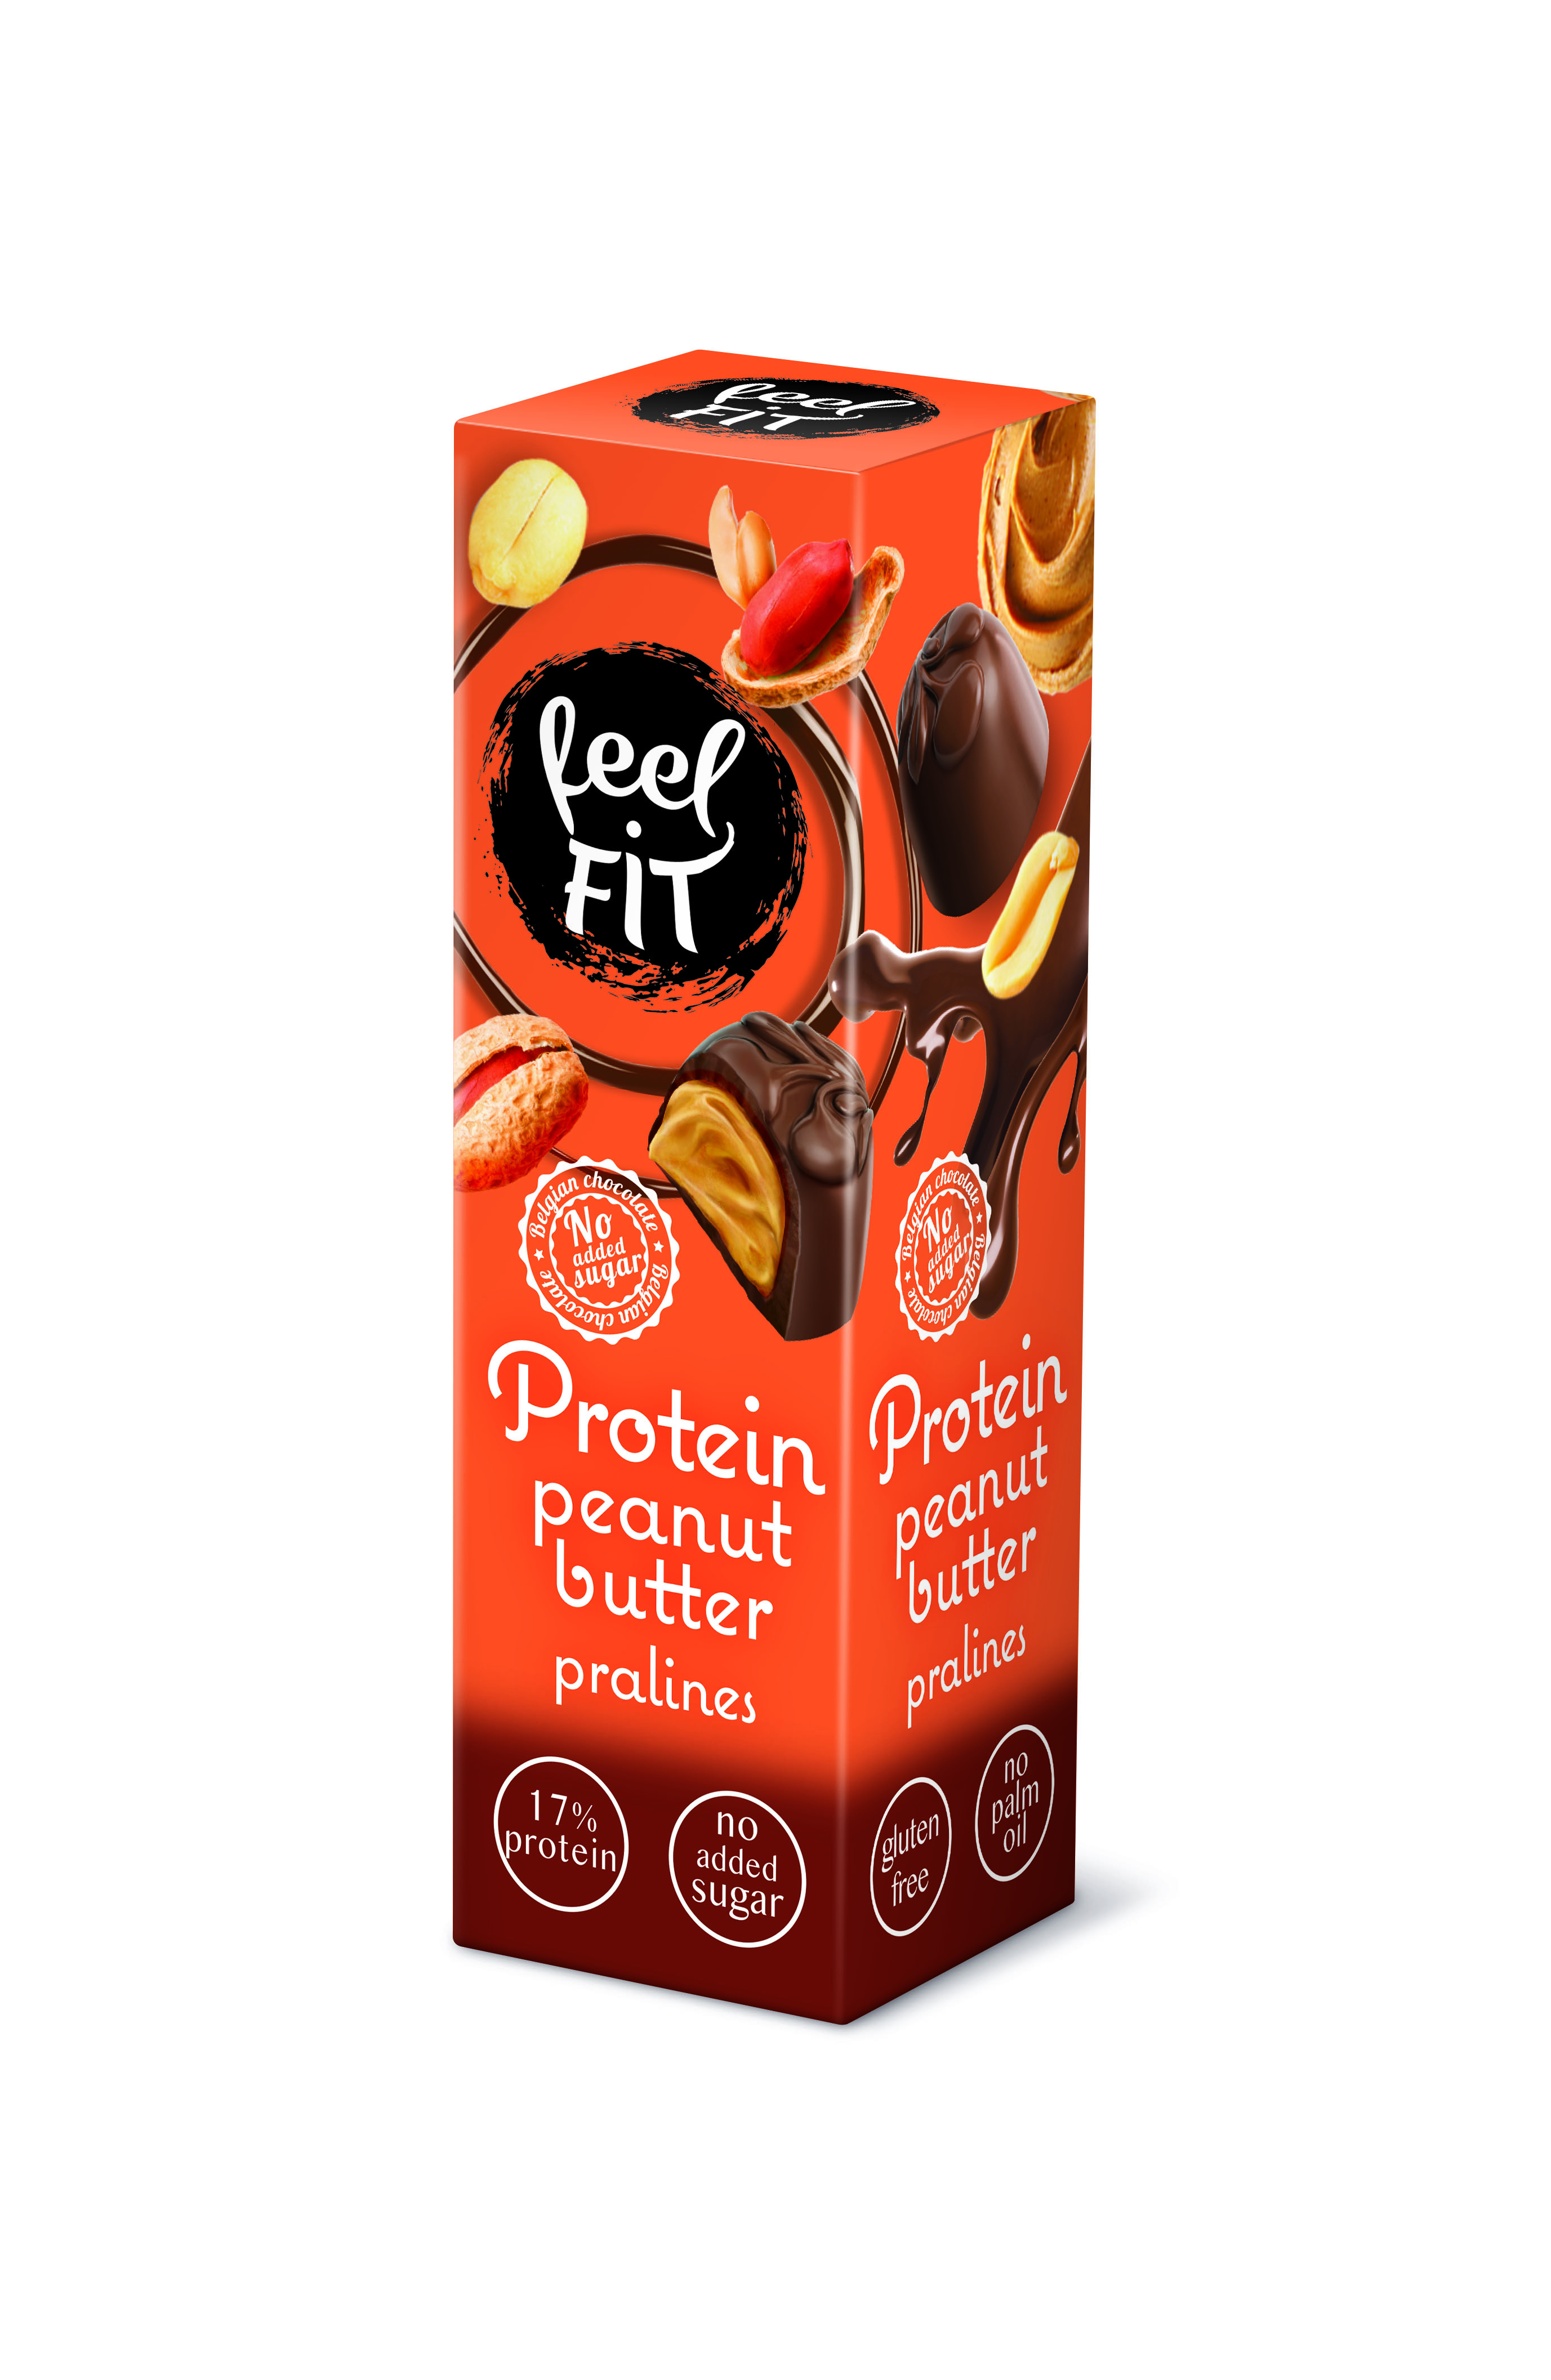 Protein Peanut Butter Pralines feel Fit small